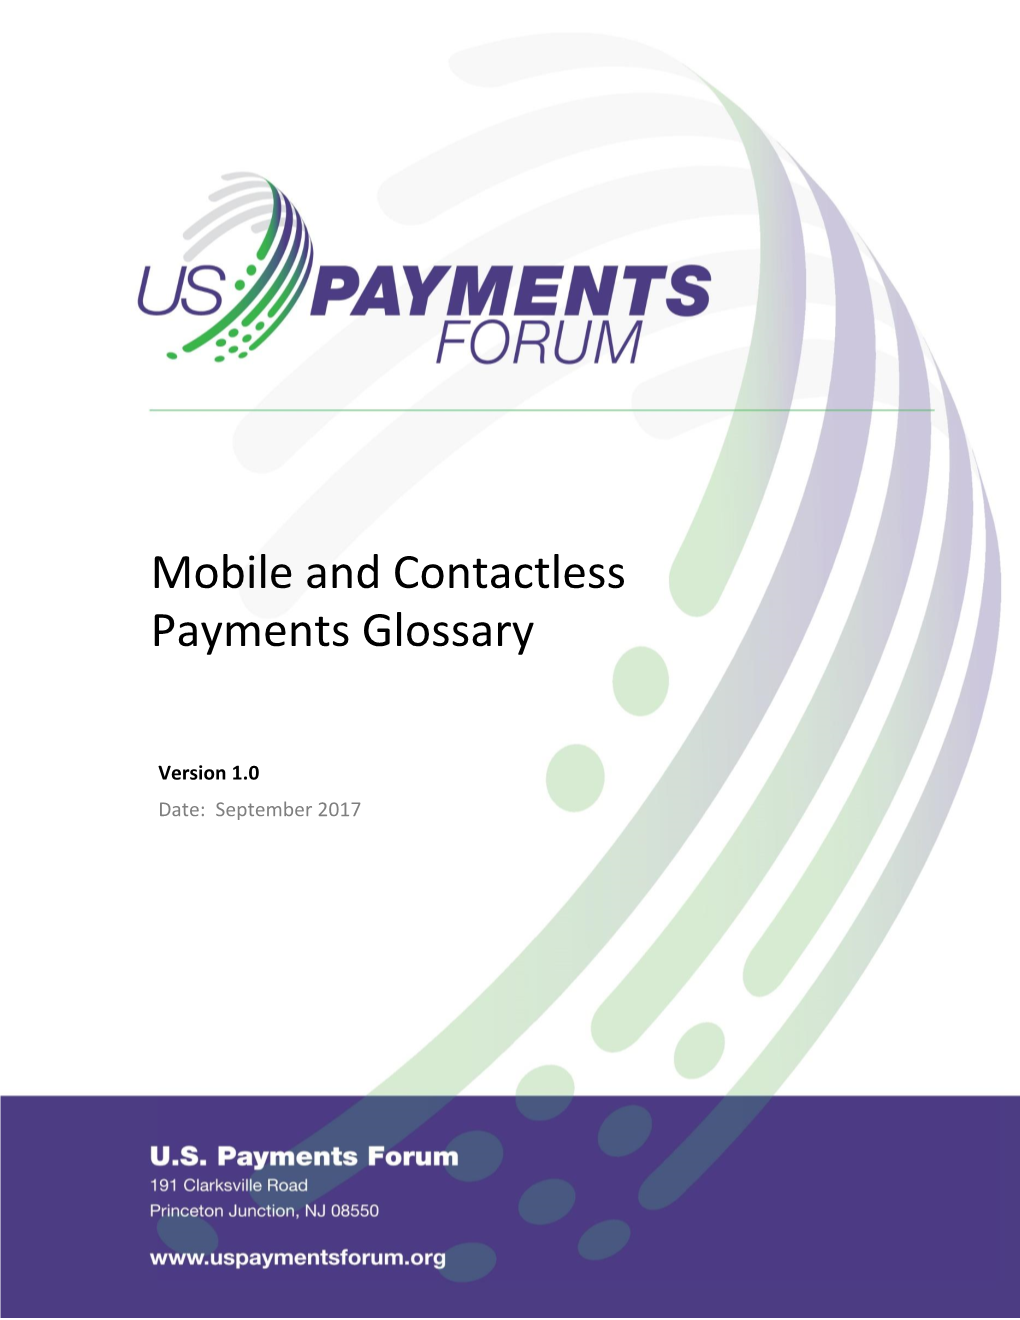 Mobile and Contactless Payments Glossary